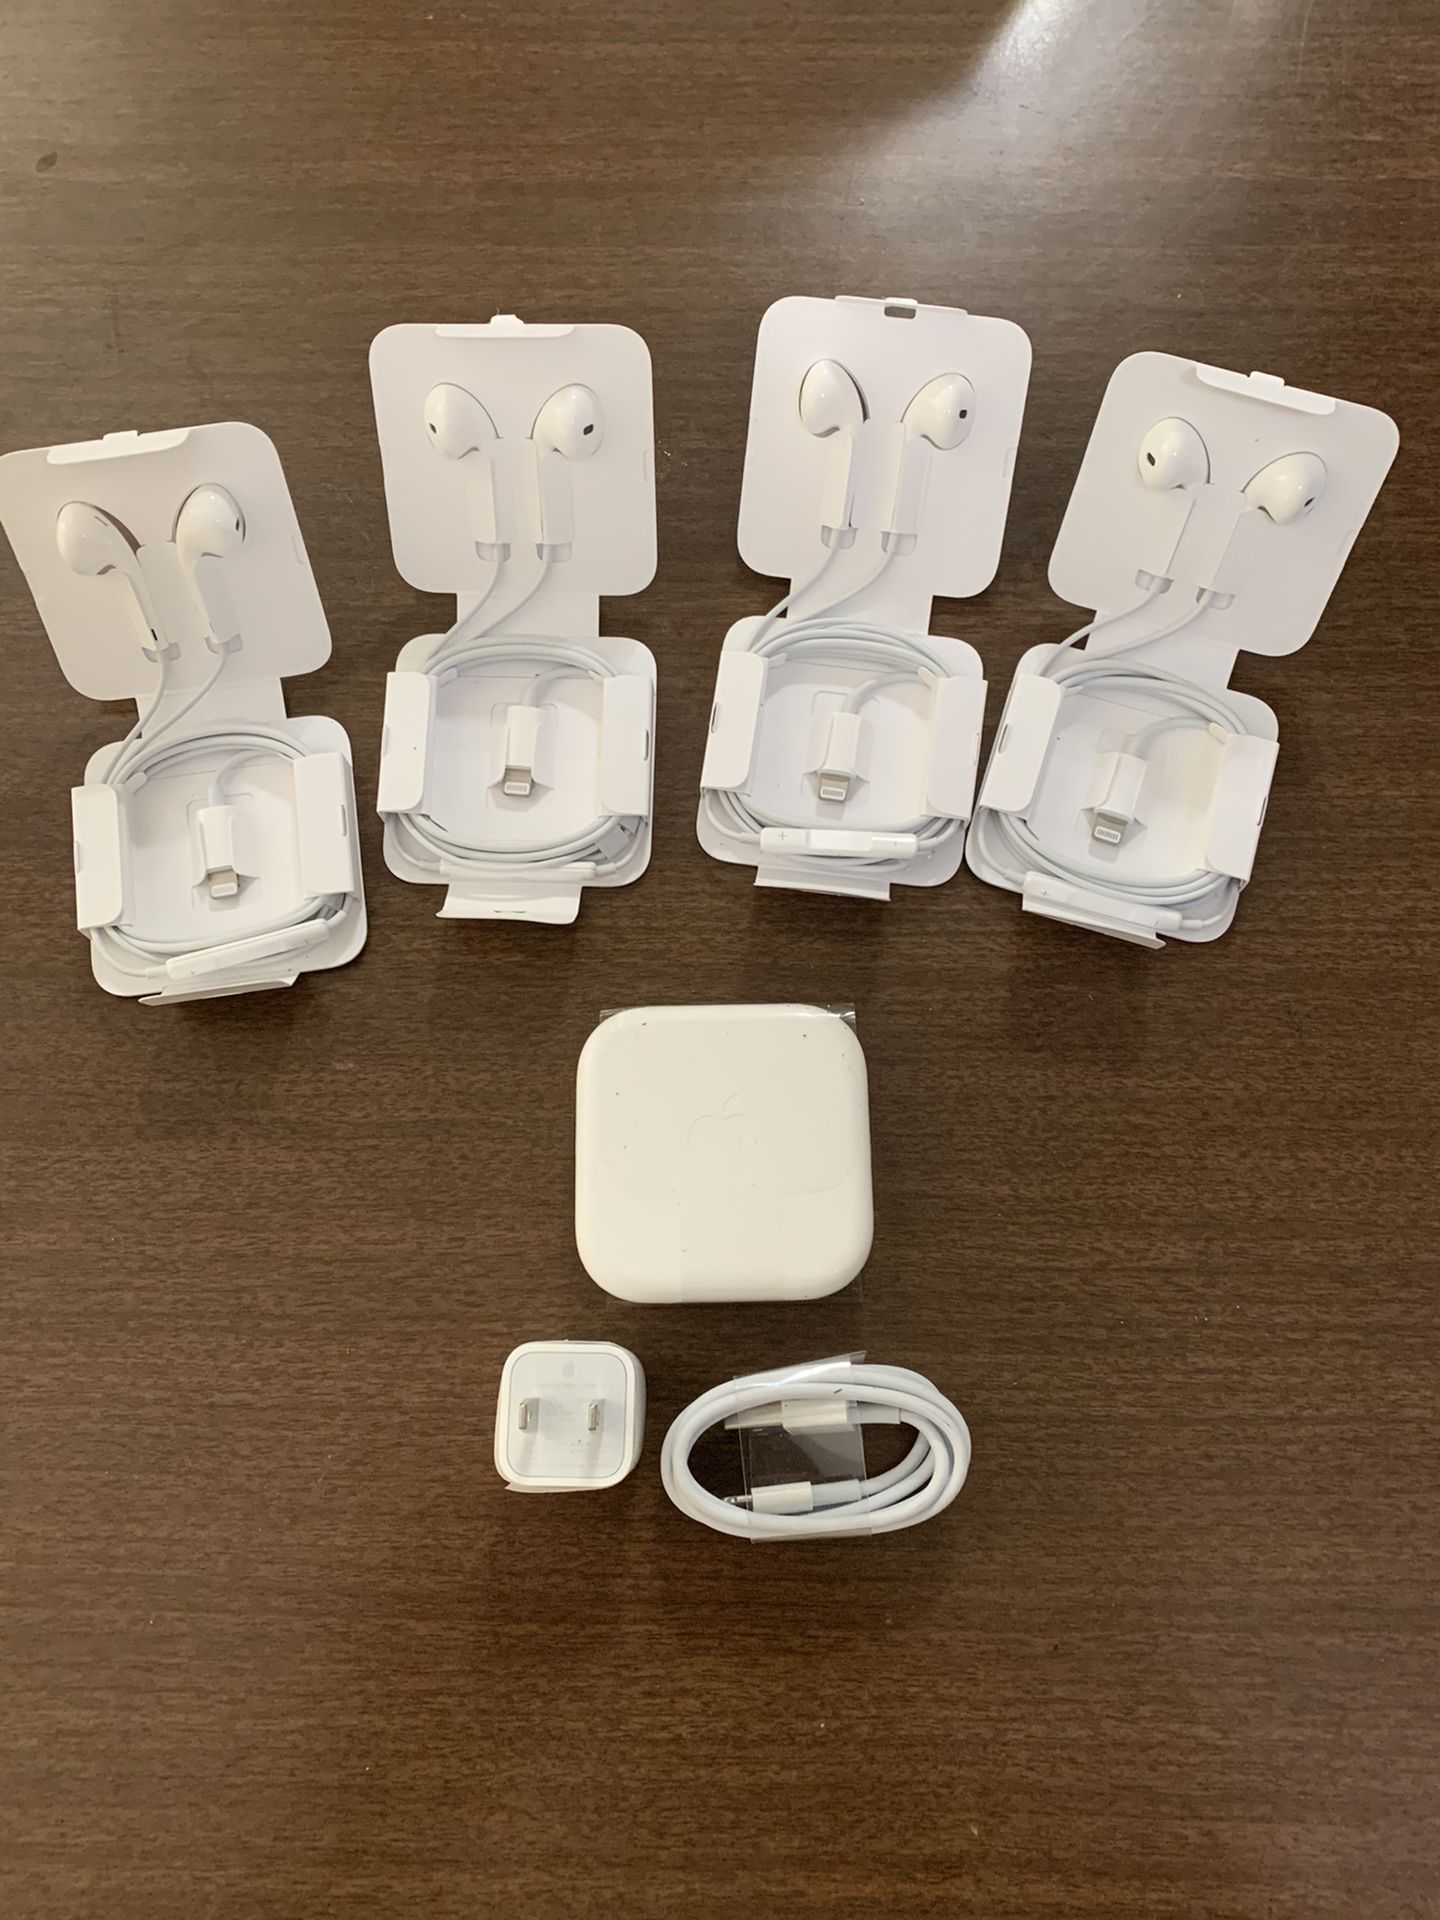 Five pair of iPhone wired headphones $20 each. Plus a wall charger and USB cord for $20.00 One pair of the headphones are for a iPhone seven and olde